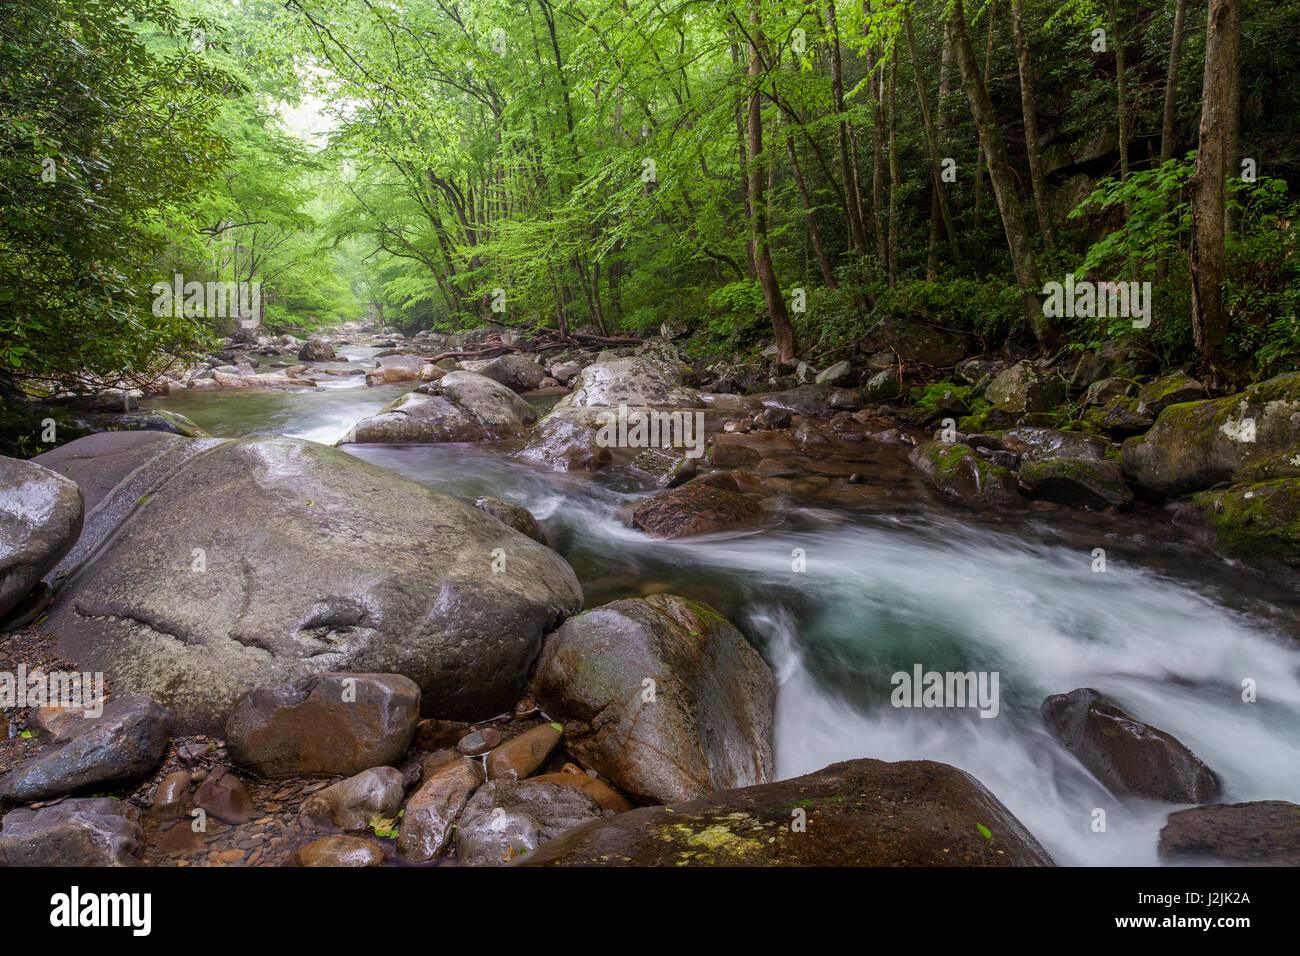 This is an image looking downstream on Big Creek near Mouse Creek Falls.  Big Creek flows generally eastward through the northwestern part of the Great Smoky Mountain National Park, with its headwaters near Inadu Knob. Stock Photo